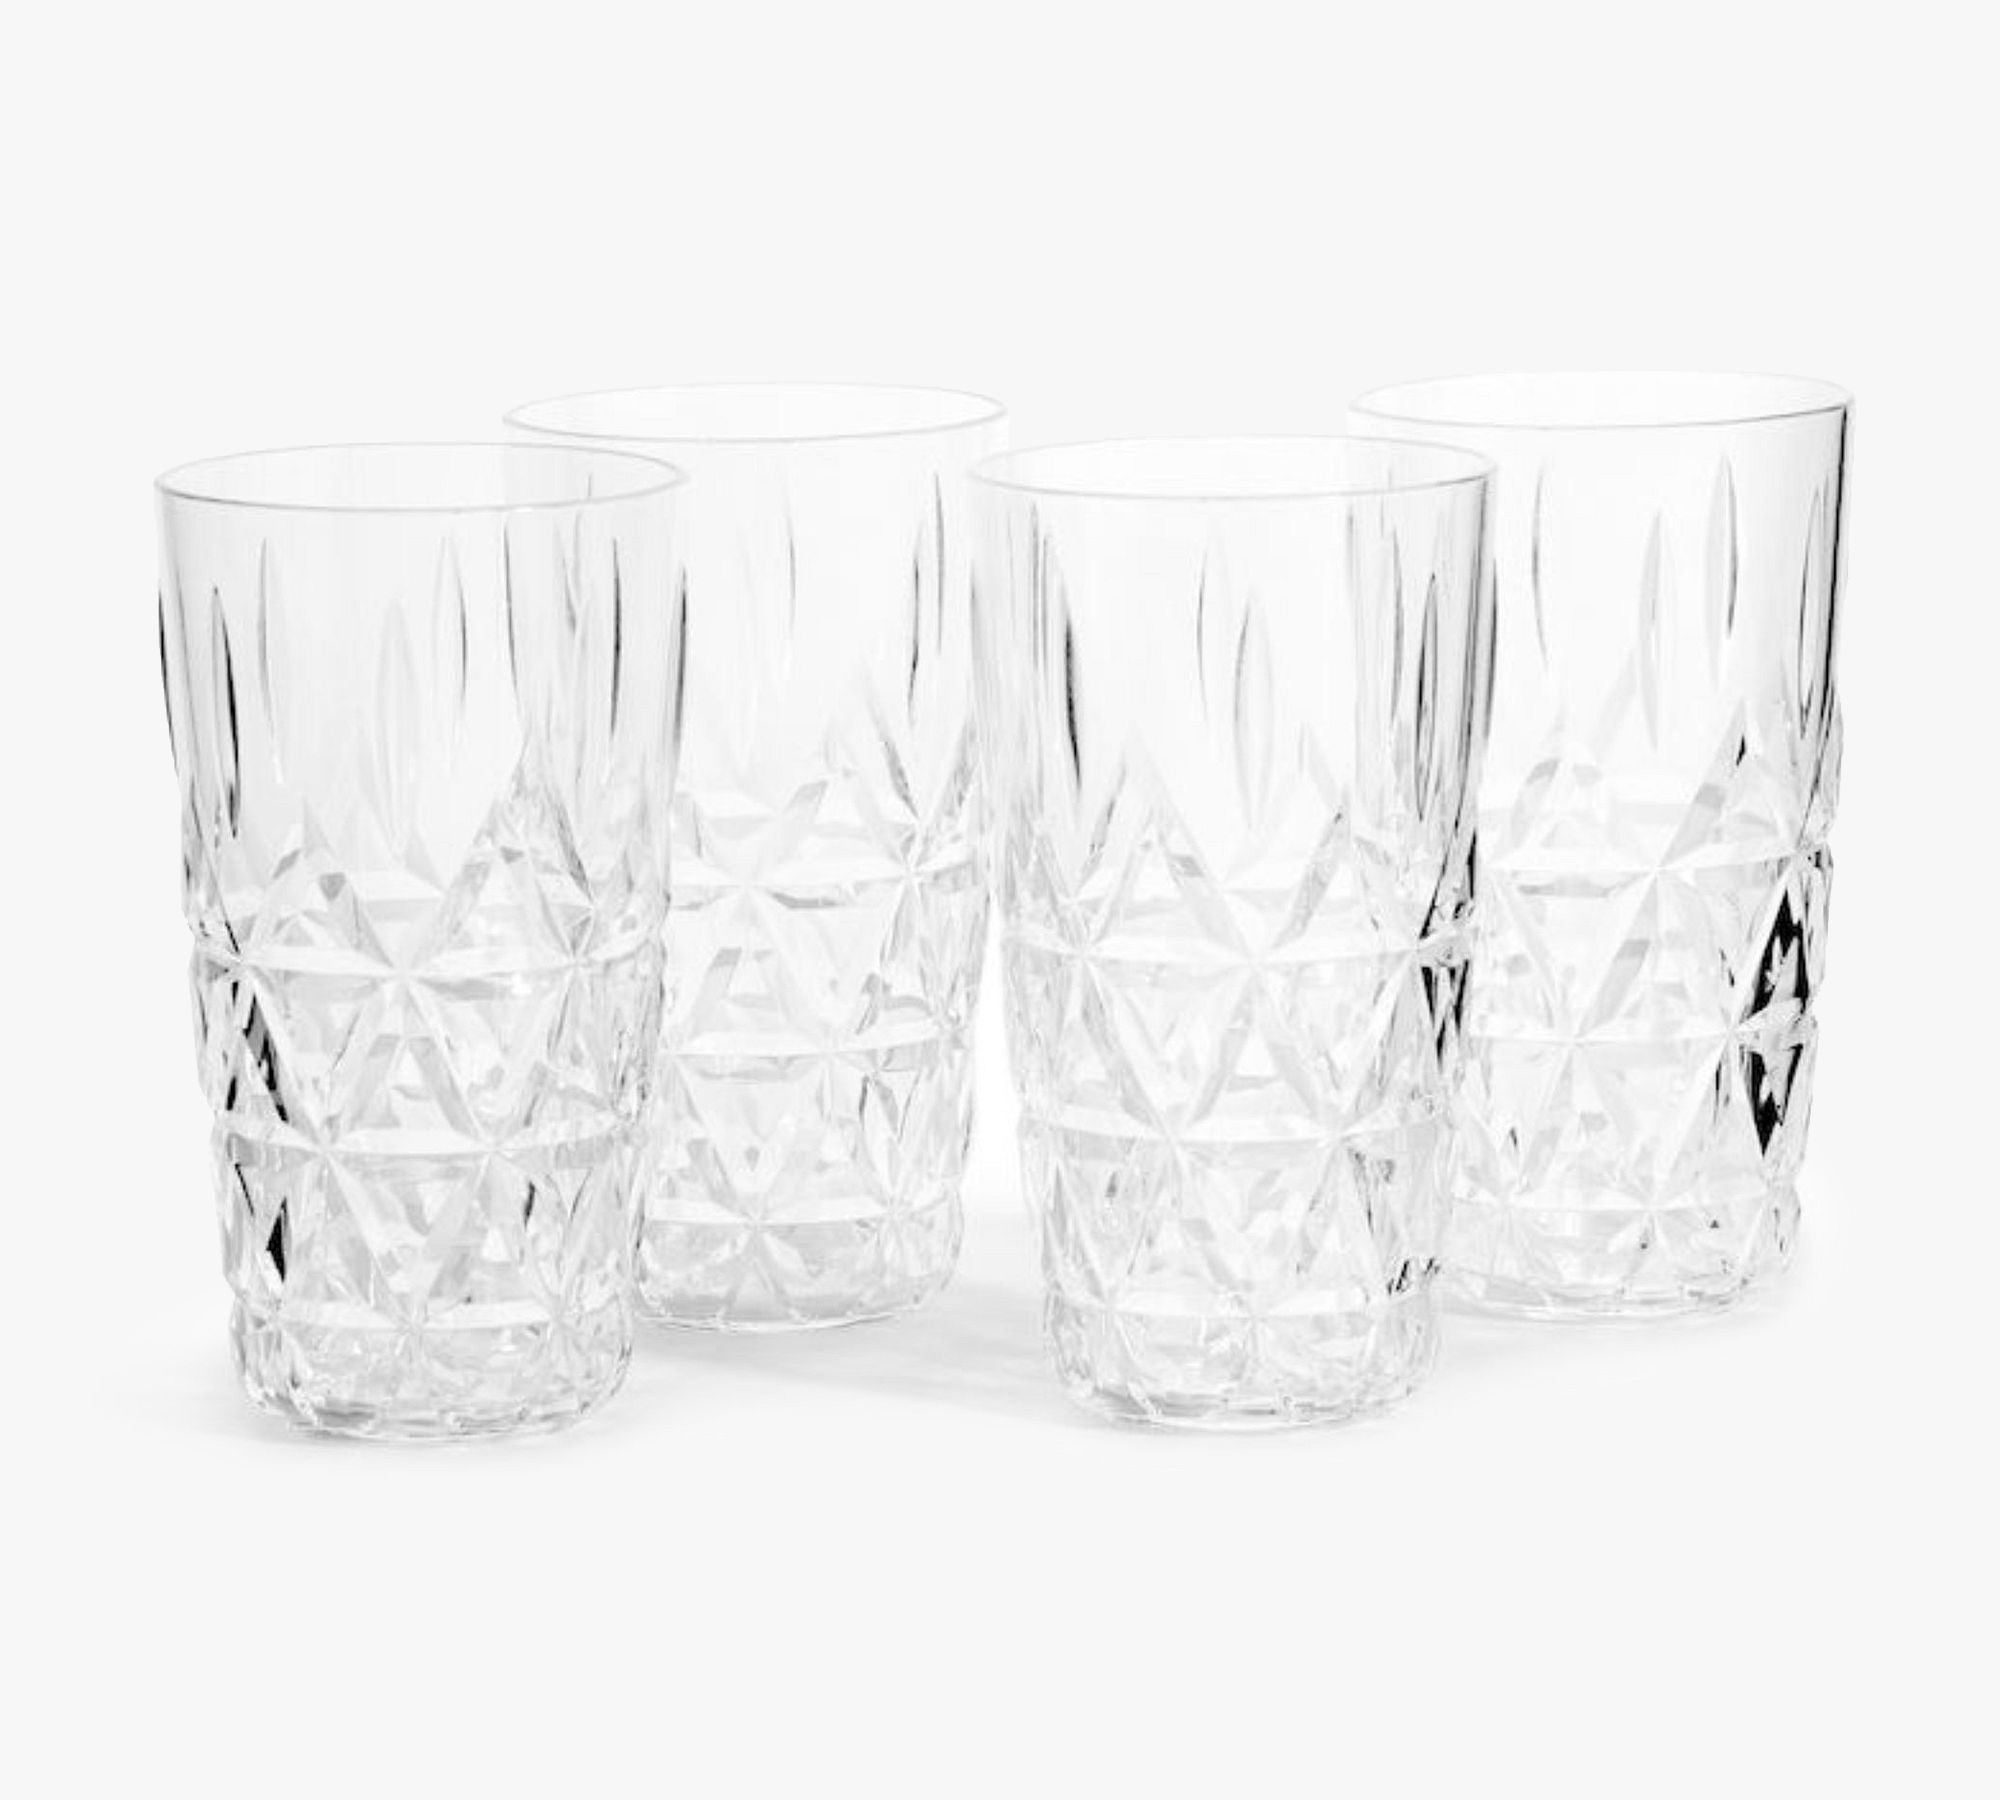 Outdoor Picnic Tumblers - Set of 4